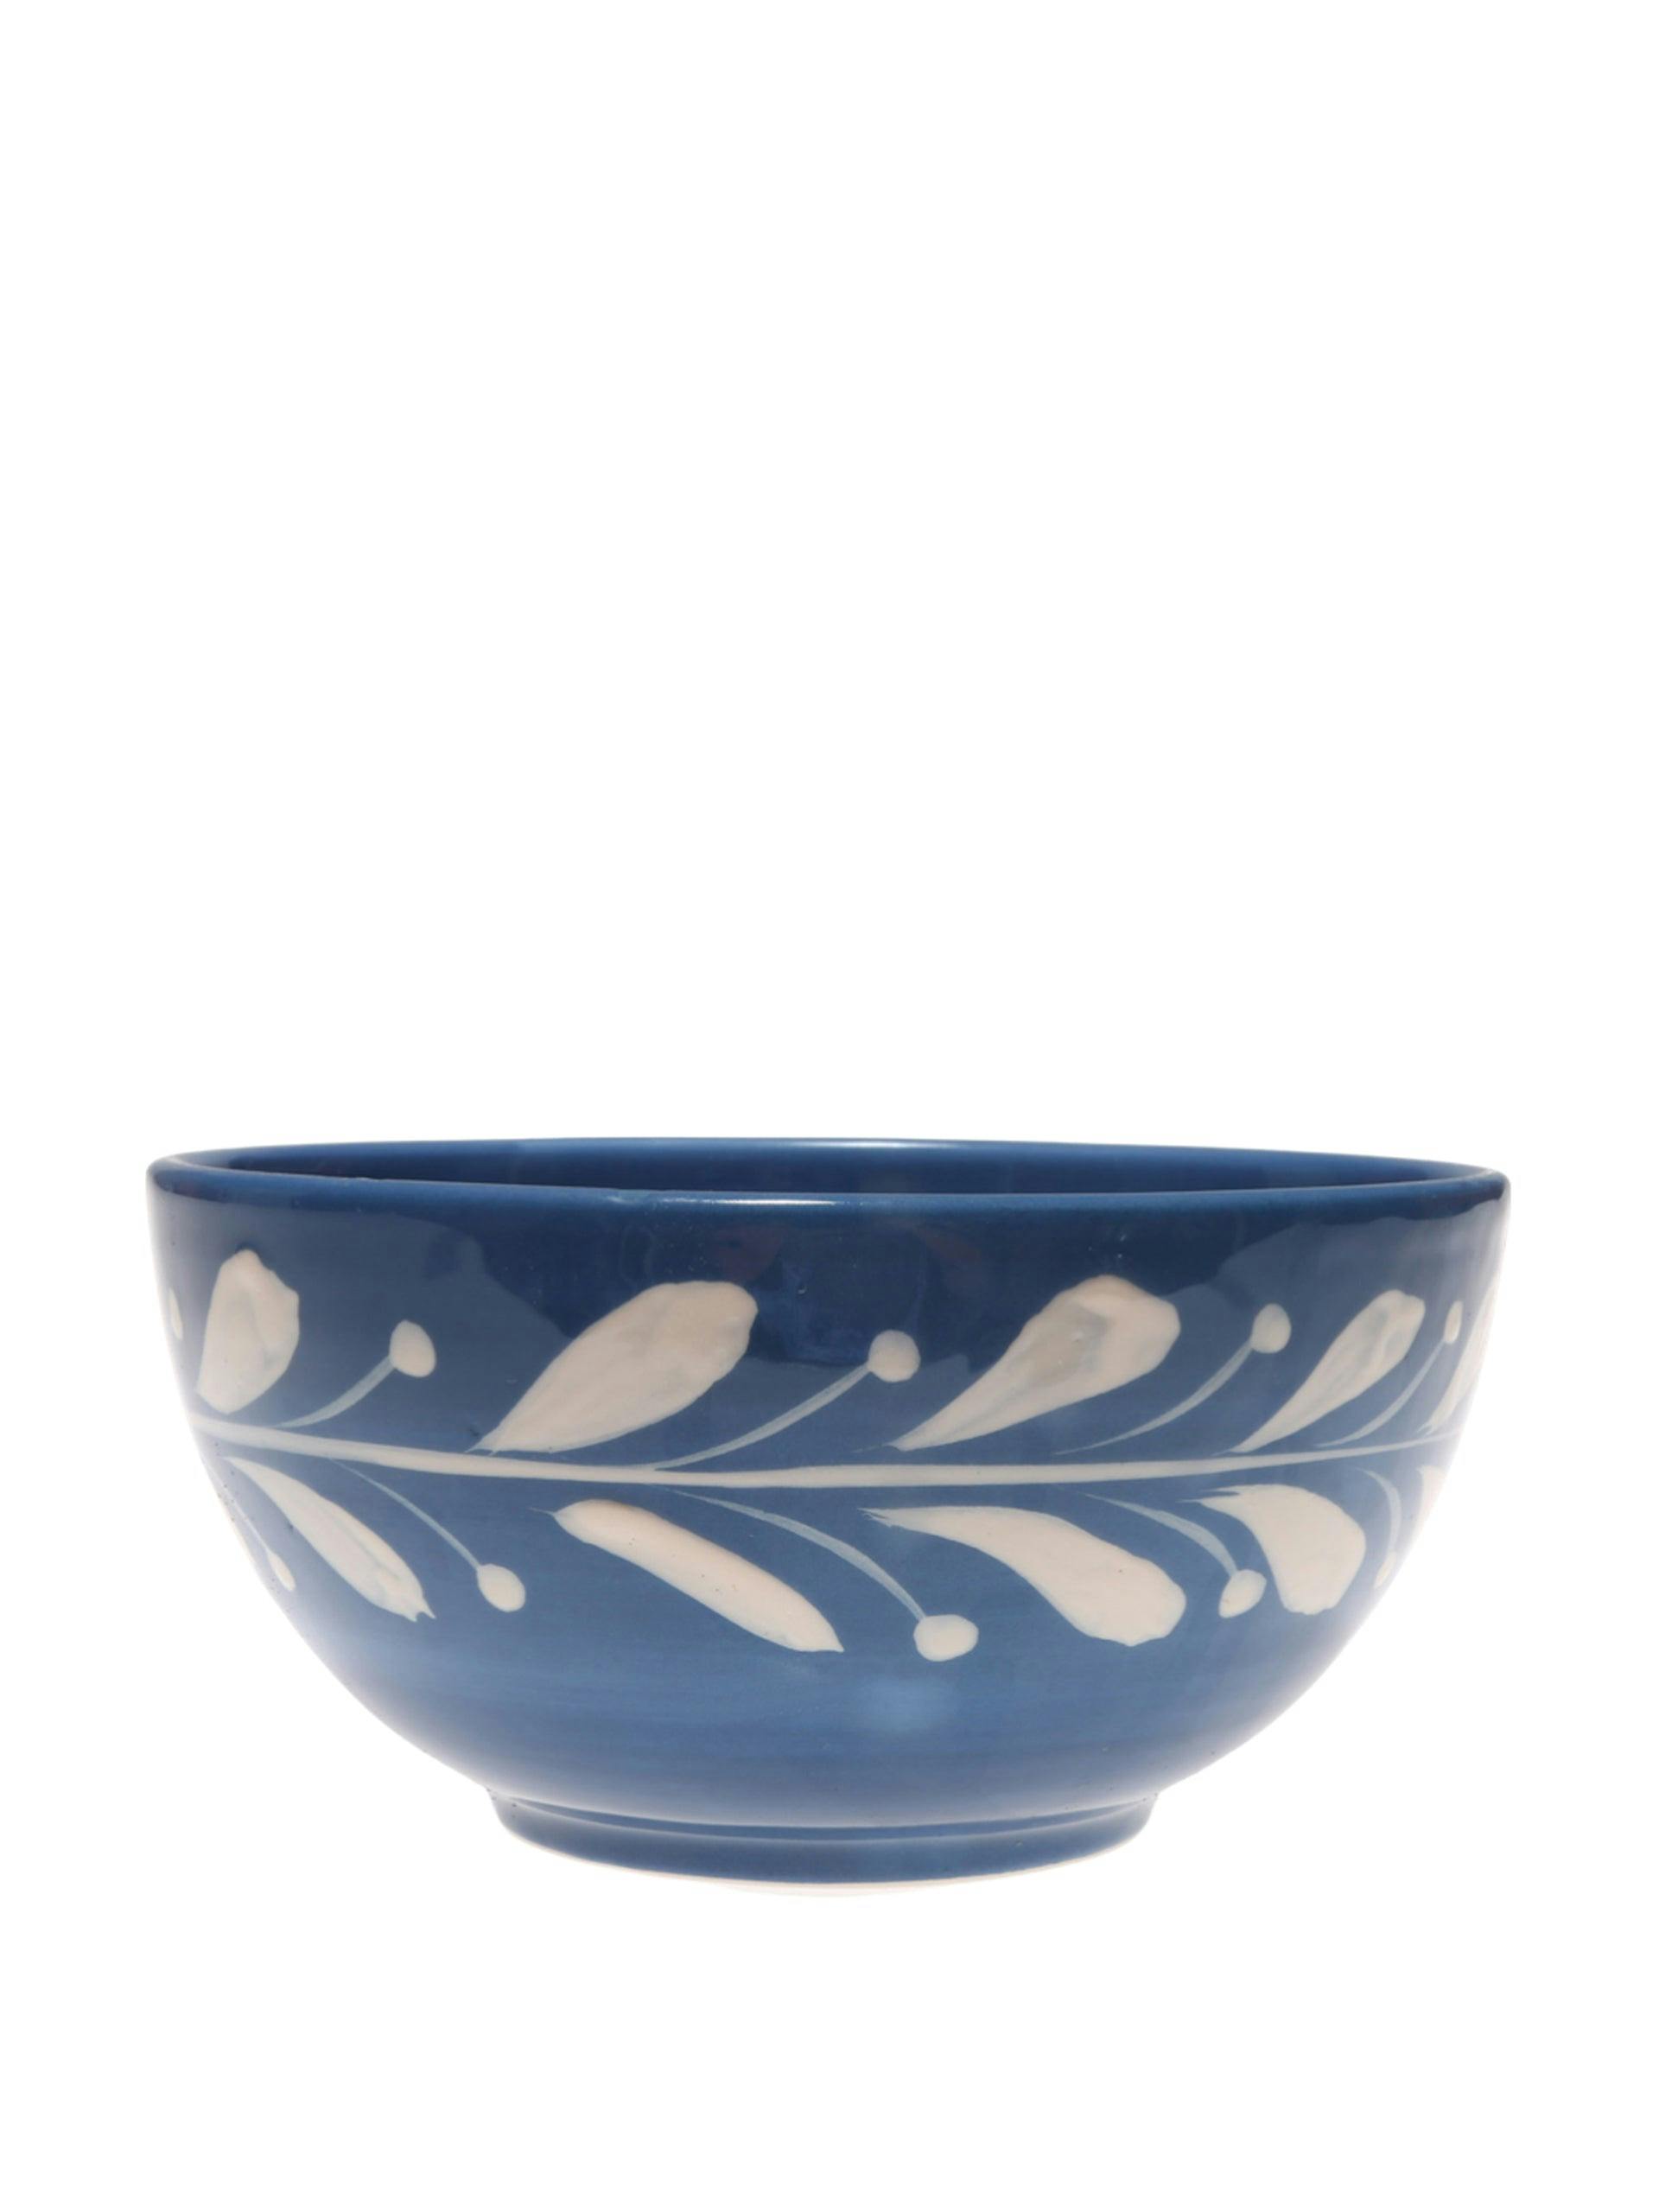 Anna reverse blue cereal bowl